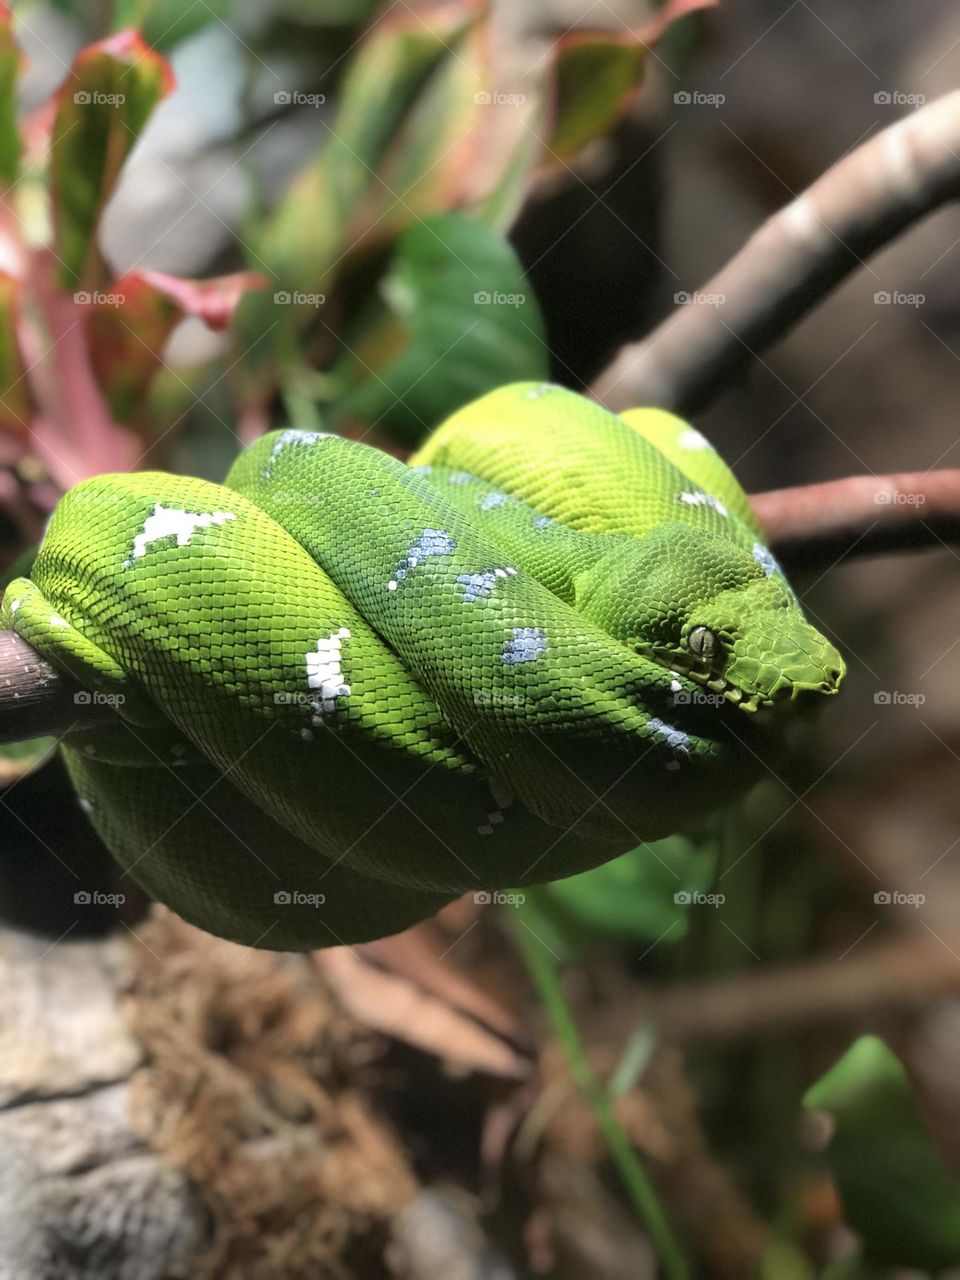 A beautiful snake I took of at a zoo. As much as I love nature and animals I love photography and sharing my work to the world is something amazing.